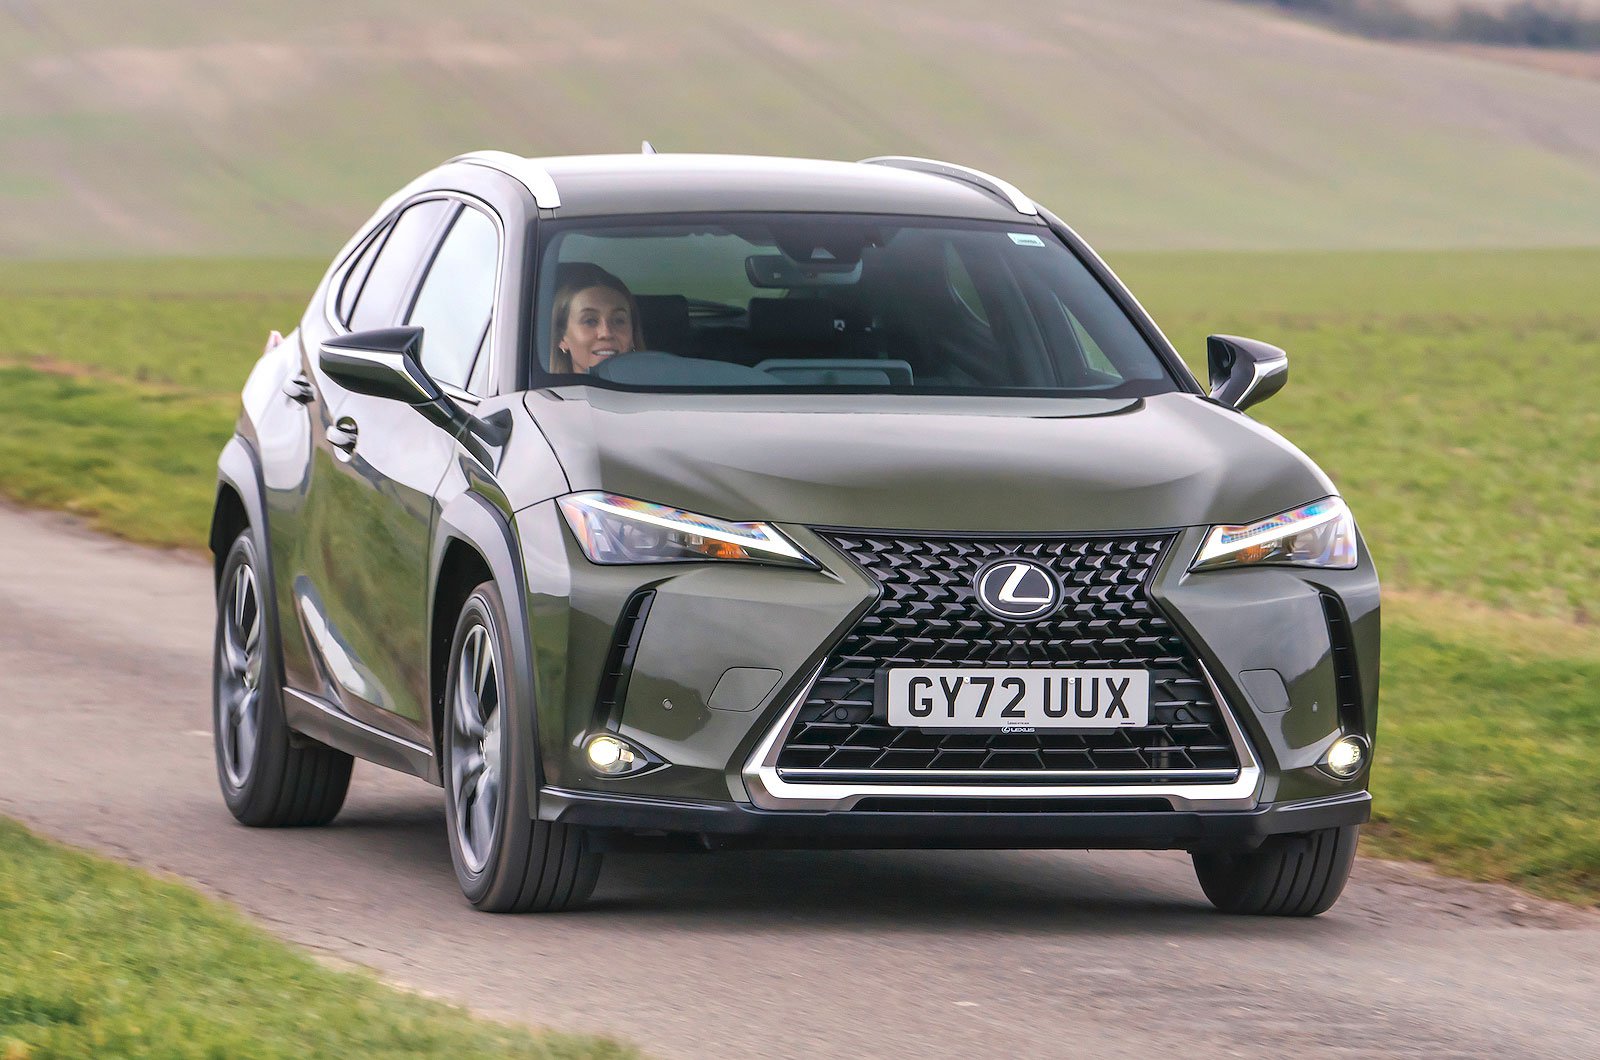 <p>The UX appeals in a number of ways, being efficient, smart inside and quiet to drive around town. However, it's heavily compromised in a number of important areas, including space, practicality and performance. So, for that reason, we'd steer you towards other family SUVs, or even the bigger Lexus NX if your budget can stretch to it. </p>  <p><strong>Model</strong> UX |<strong> Version </strong>2.0 250h F-Sport Design | <strong>Leasing price from</strong> £345.91 | <strong>The deal</strong> 48-month term, with annual limit of 8000 miles. Plus £2075.46 initial payment | <strong>Star rating</strong> 2</p>  <p><strong>Lexus UX leasing deals >></strong>  <strong>Lexus UX review >></strong></p>